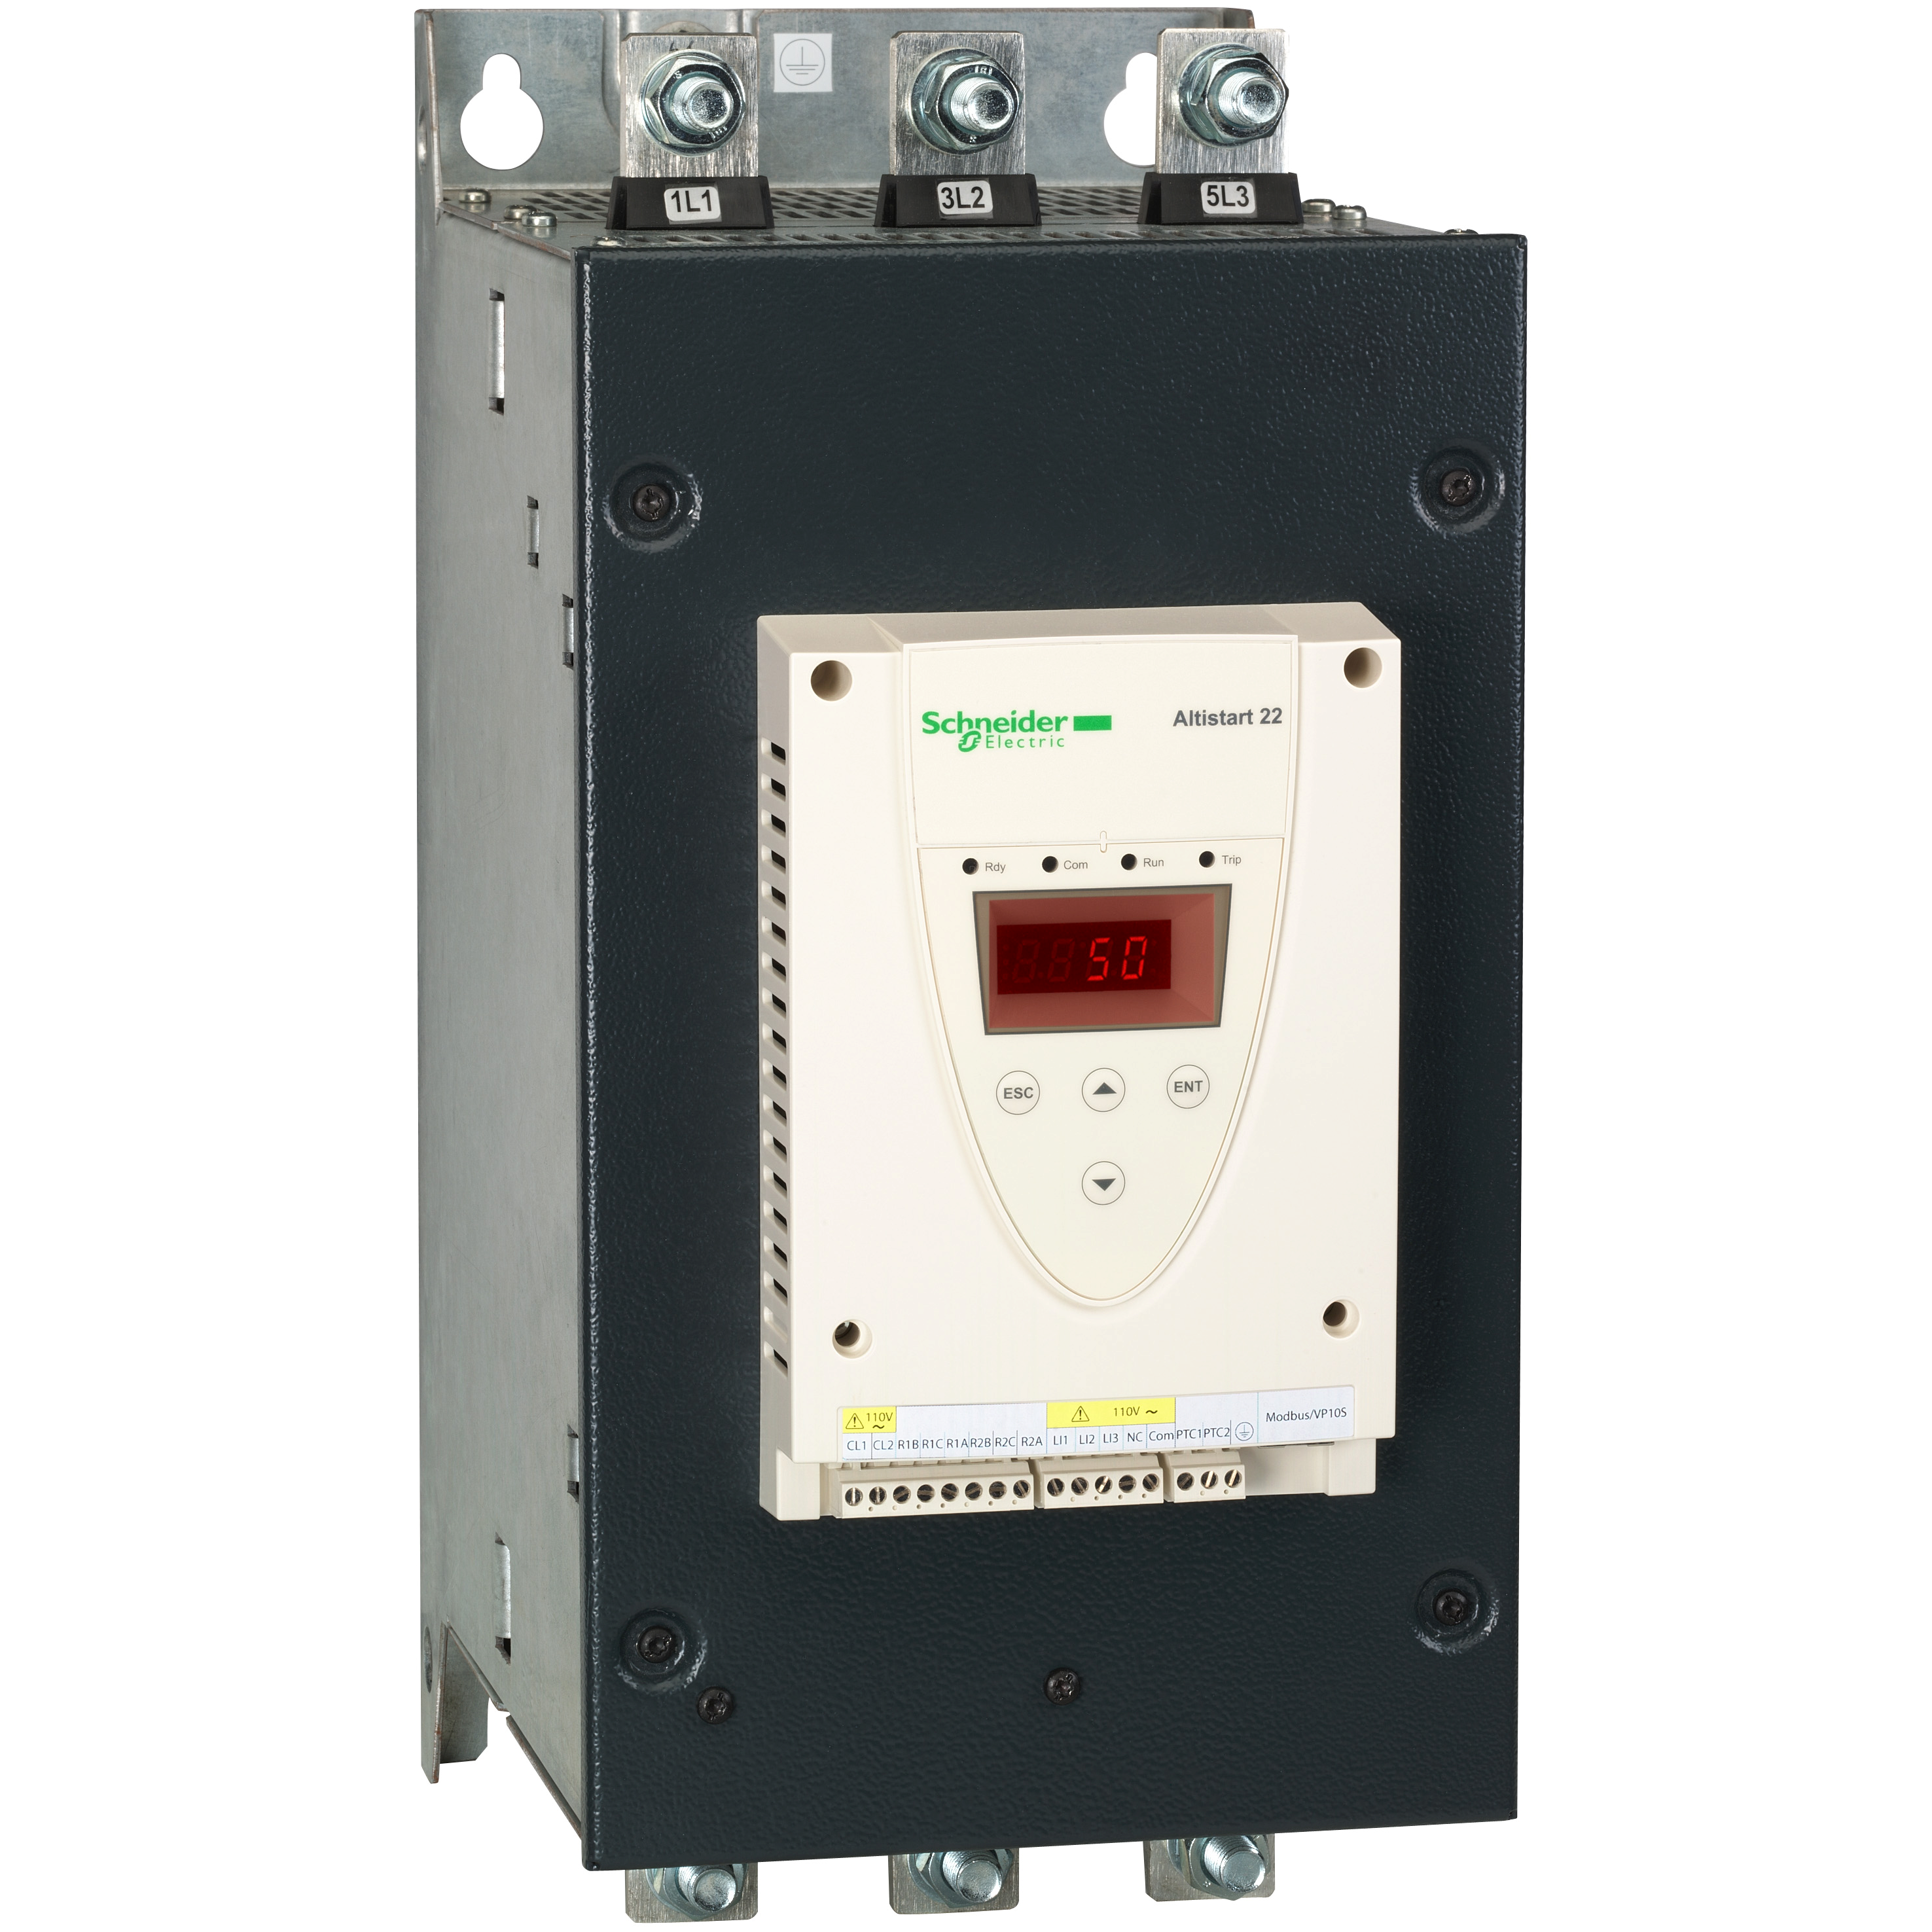 Soft start/soft stop, P=110kW, Uc=400V AC, In=210A